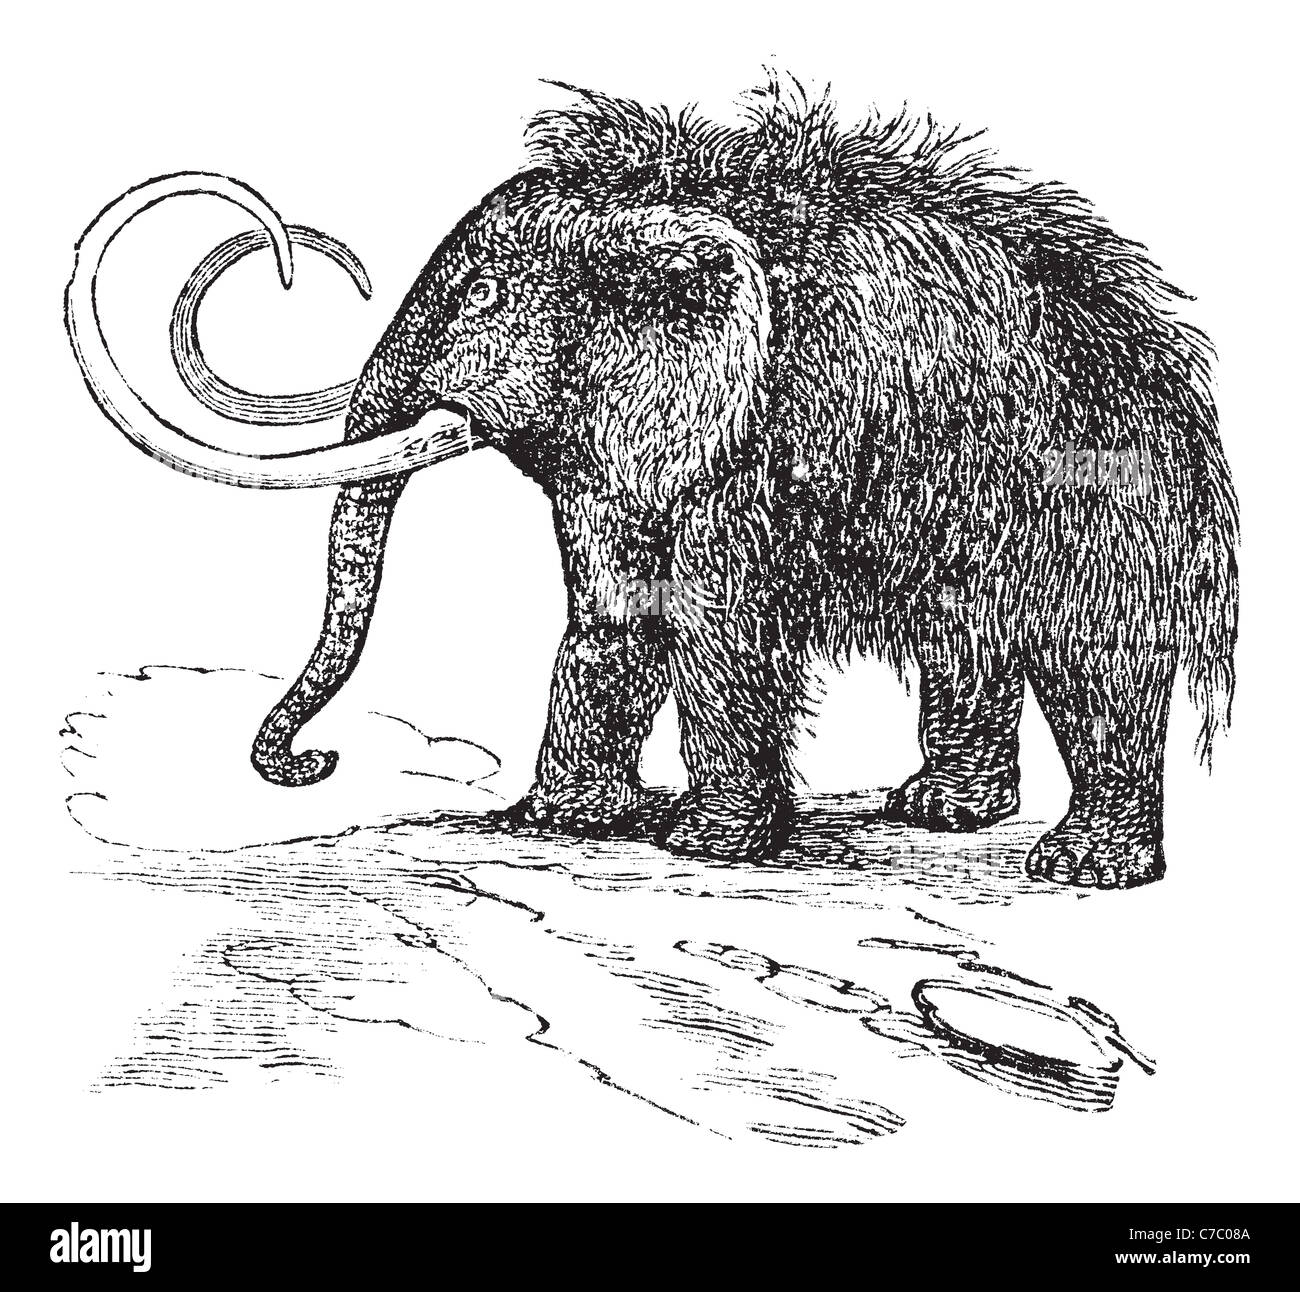 Woolly mammoth or Mammuthus primigenius or Elephas primigenius, vintage engraving. Old engraved illustration of Woolly mammoth. Stock Photo